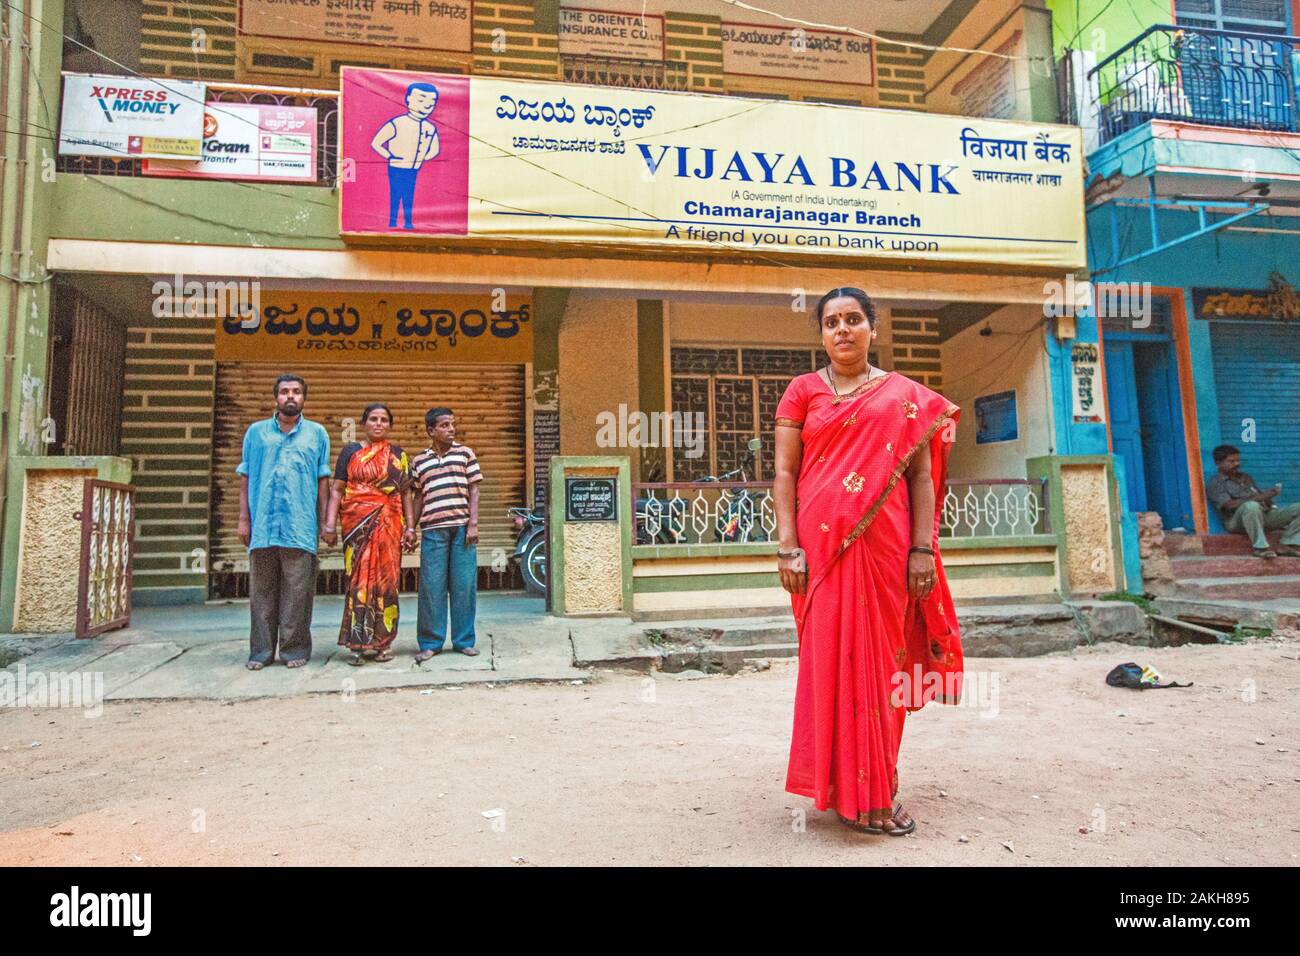 CAPTION: Shobha has taken up a job as a sweeper at Vijaya Bank in order to help support her two brothers, Siddaraju and Shivaraju, who both have sever Stock Photo